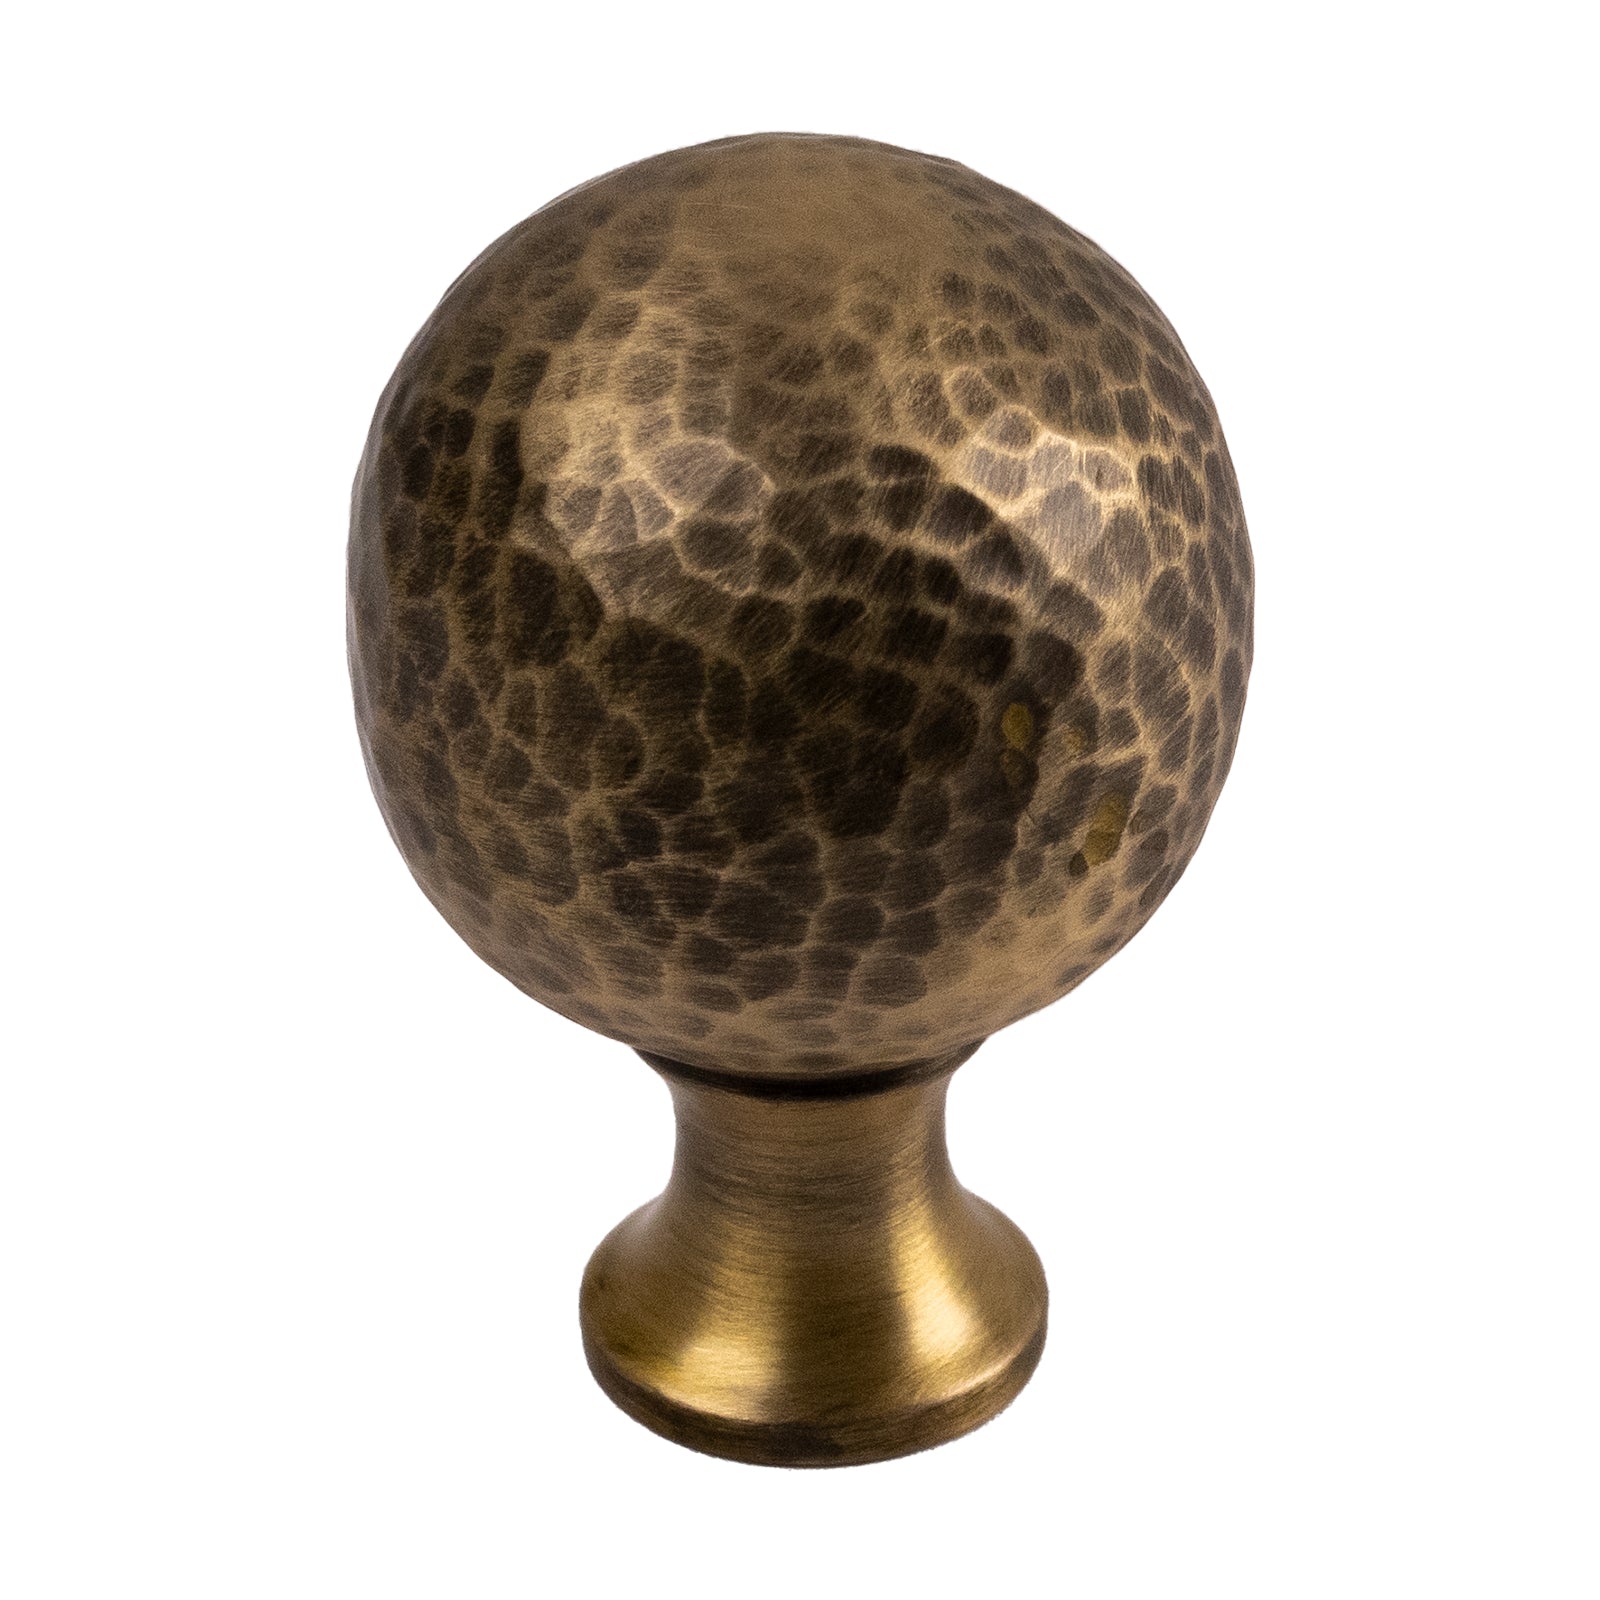 SHOW Large Hammered Ball Cabinet Knob